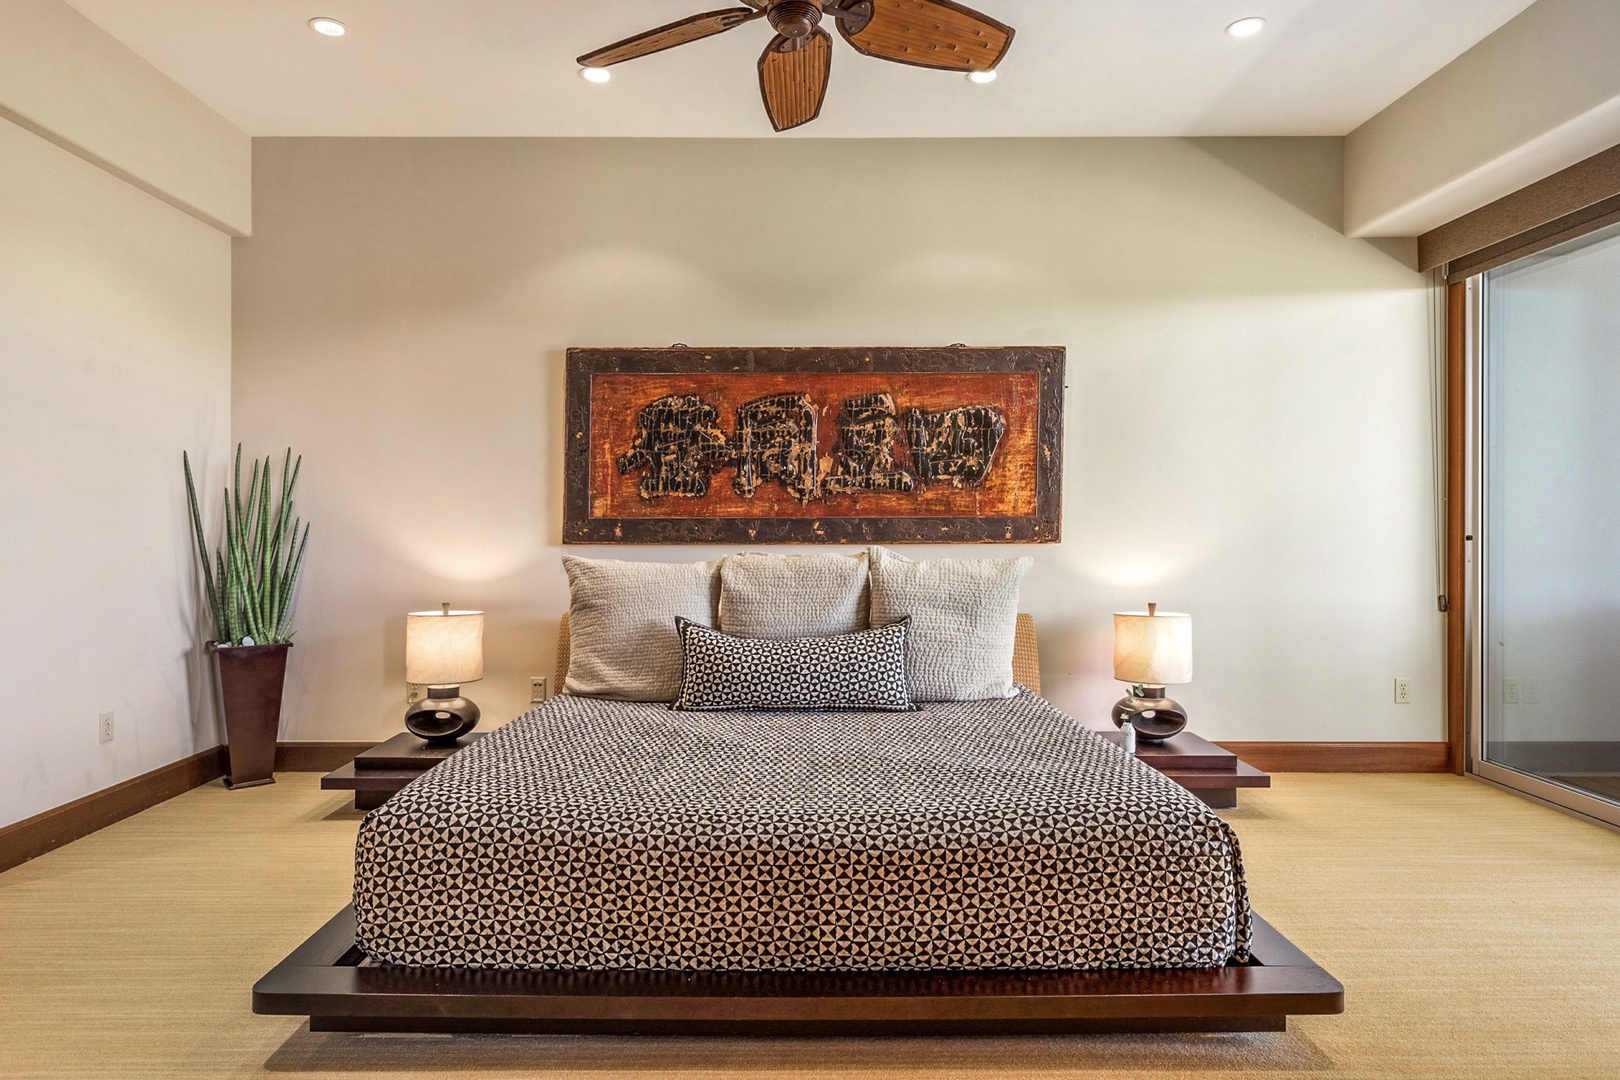 Kailua Kona Vacation Rentals, 3BD Ka'Ulu Villa (131C) at Four Seasons Resort at Hualalai - Beautifully redesigned primary bedroom with Zen-style bed, private deck, flat screen TV, walk-in closet and en-suite bath.